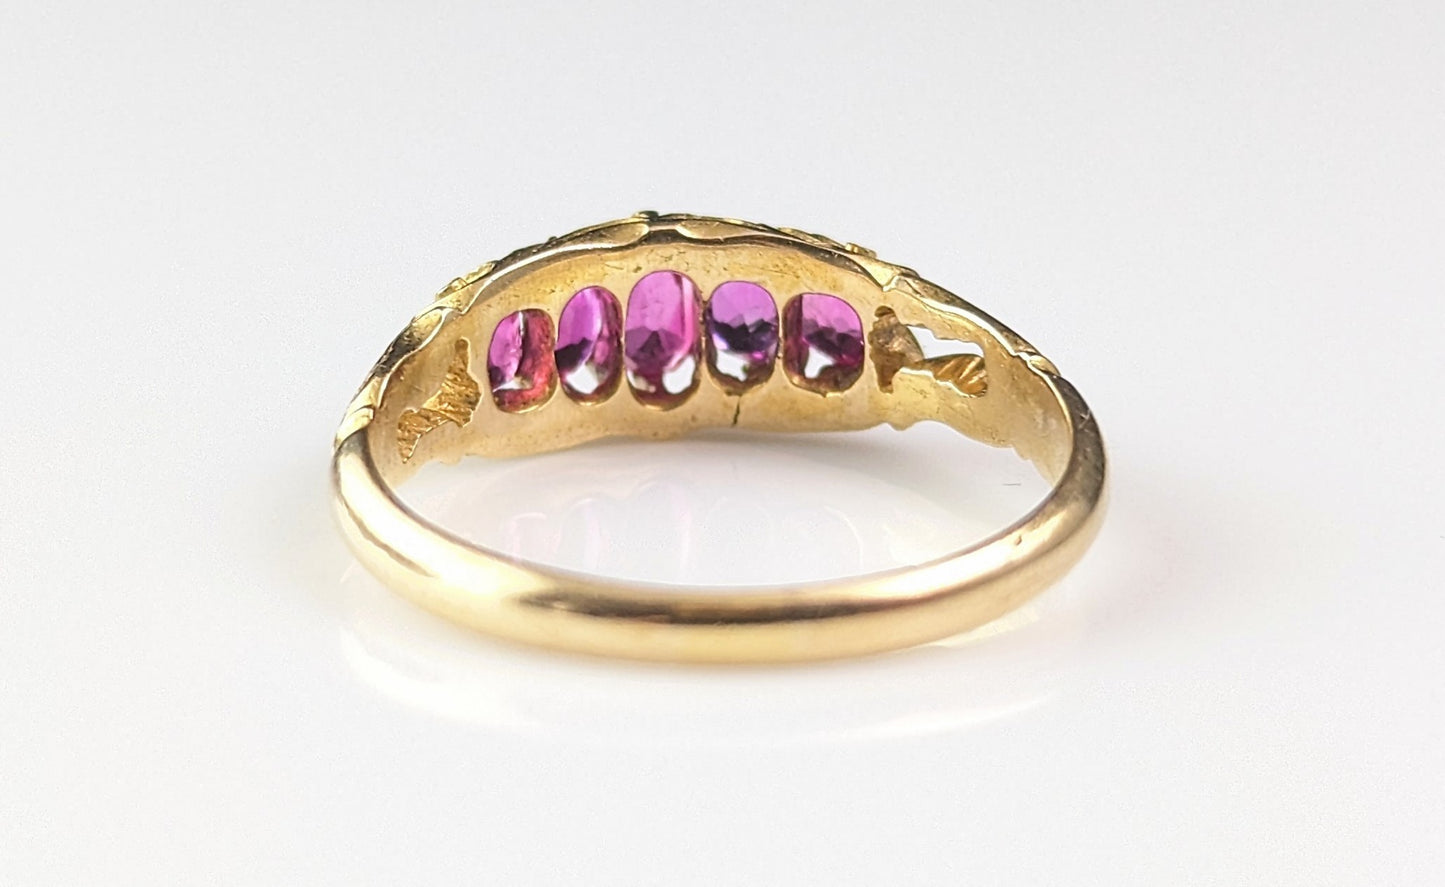 Antique Victorian Five stone ruby ring, 18ct yellow gold